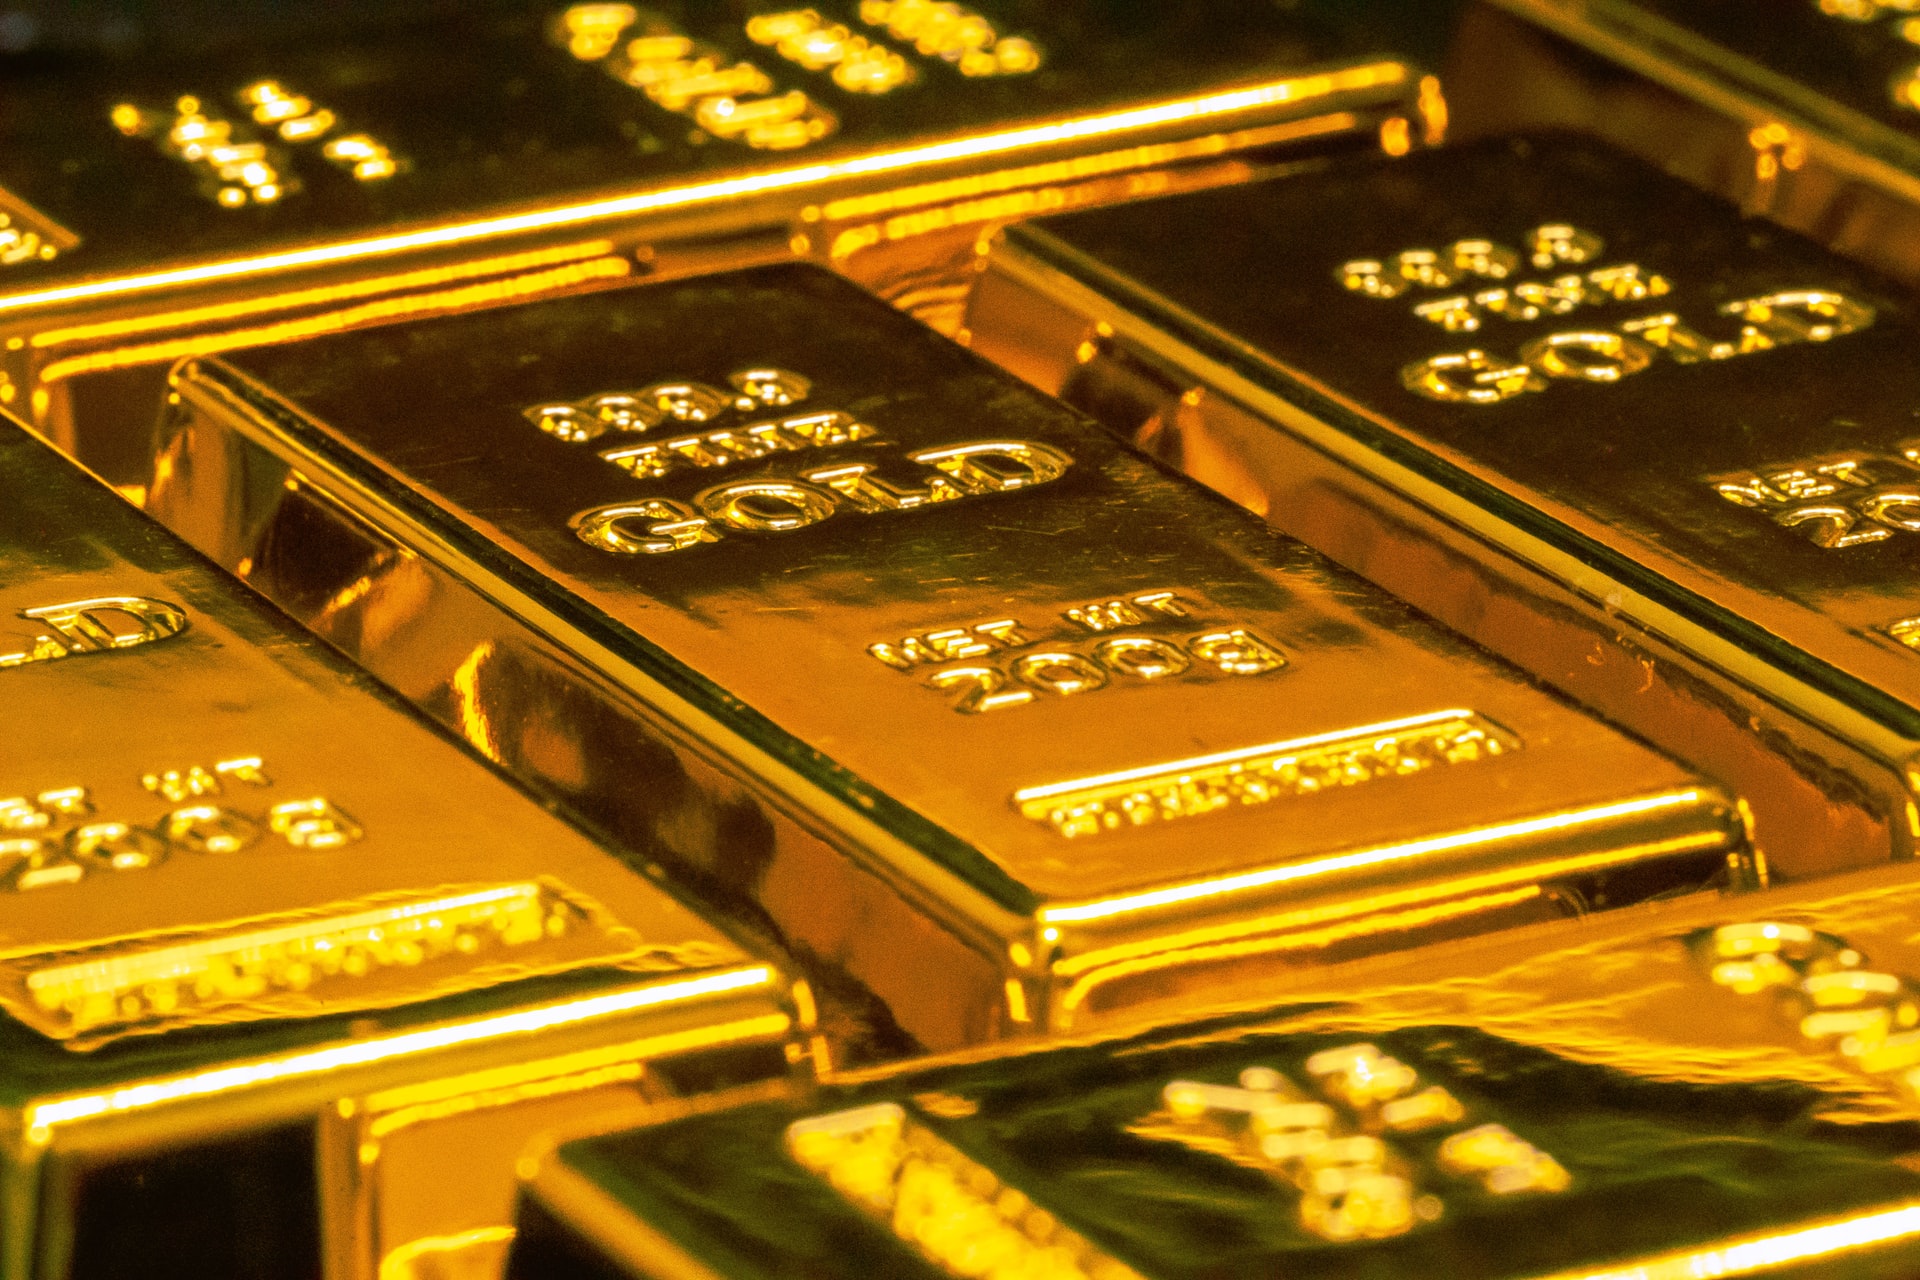 Reed Cagle Explains What Drives the Price of Gold